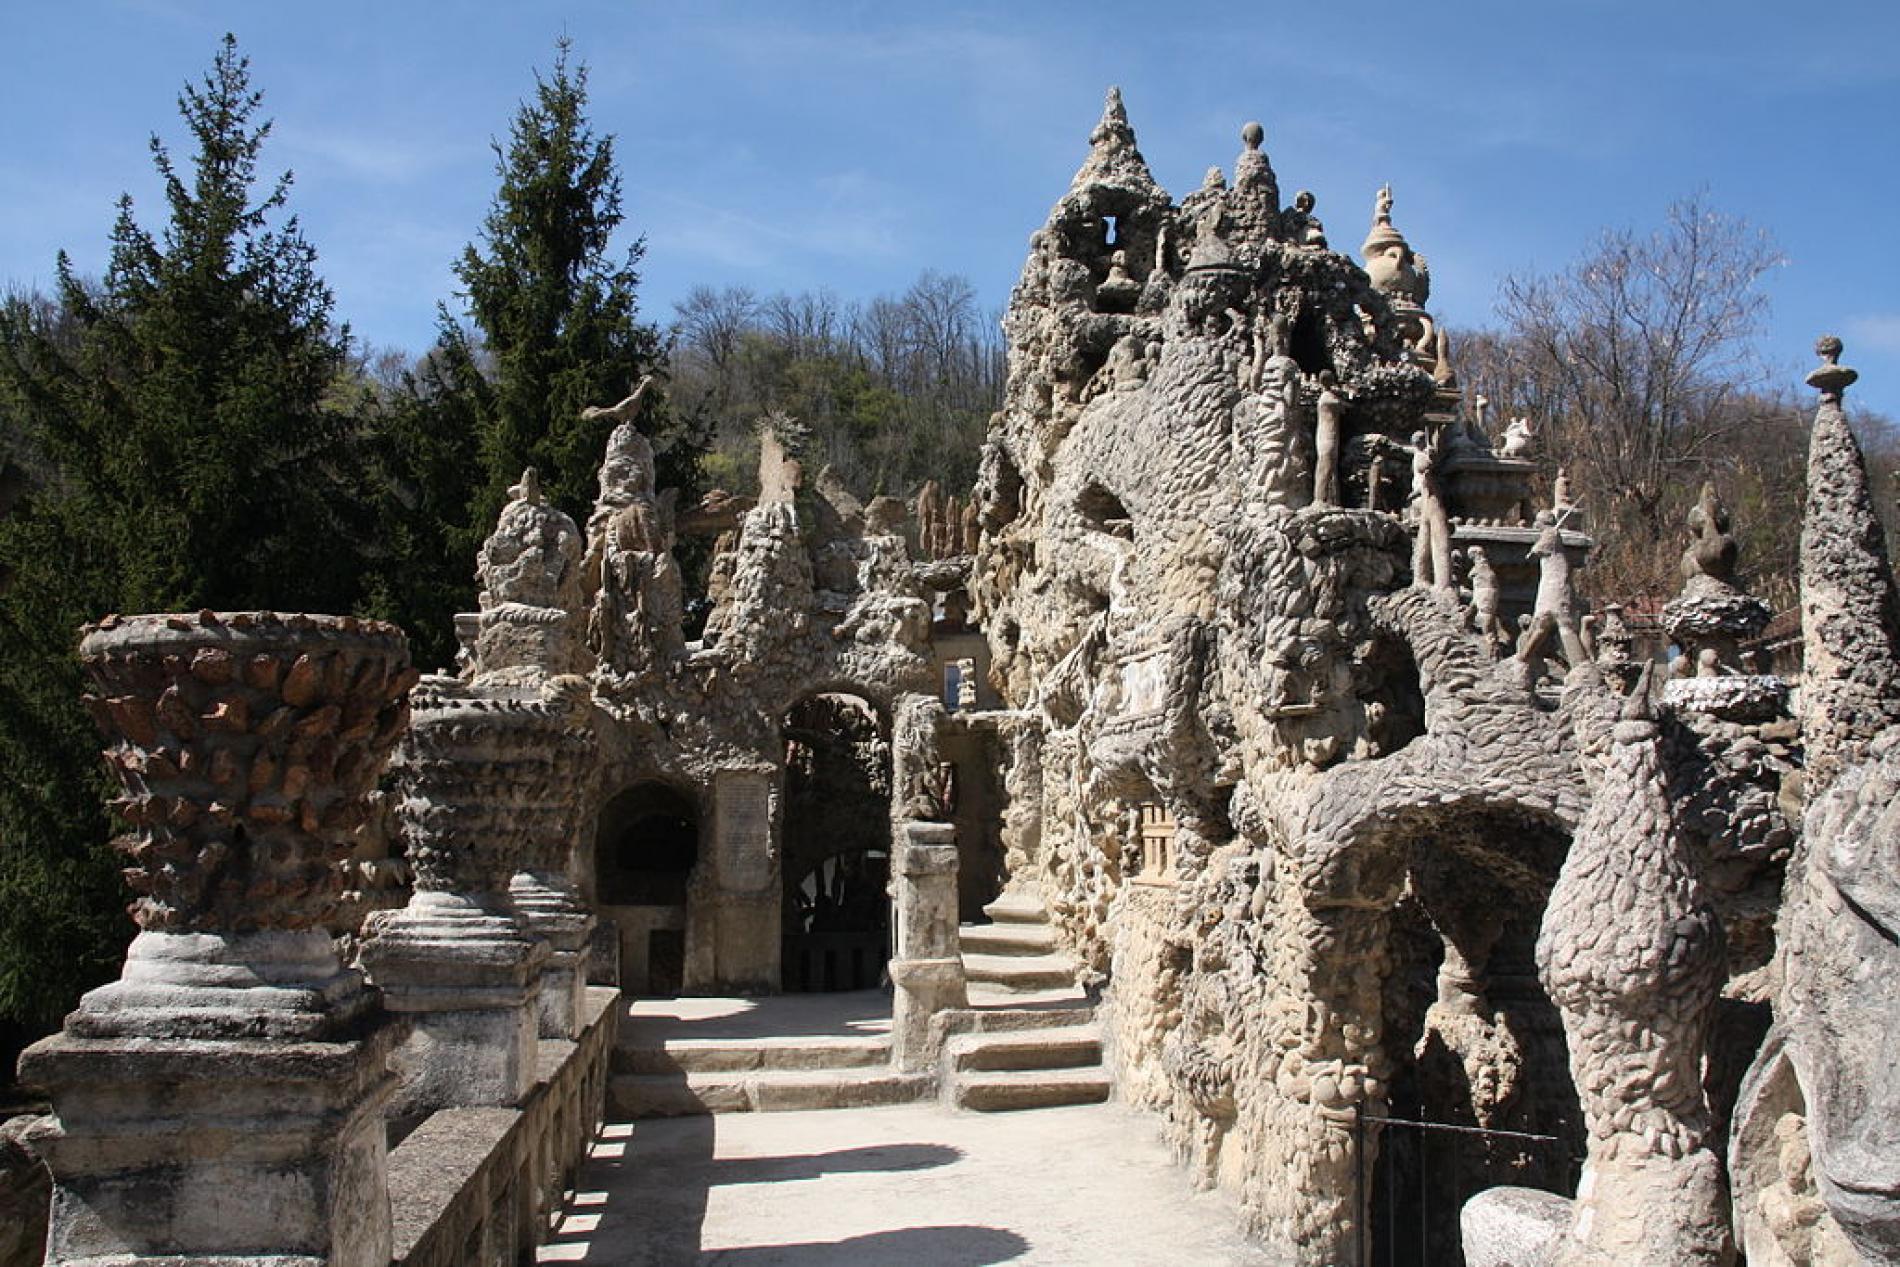 Postman Cheval’s Ideal palace